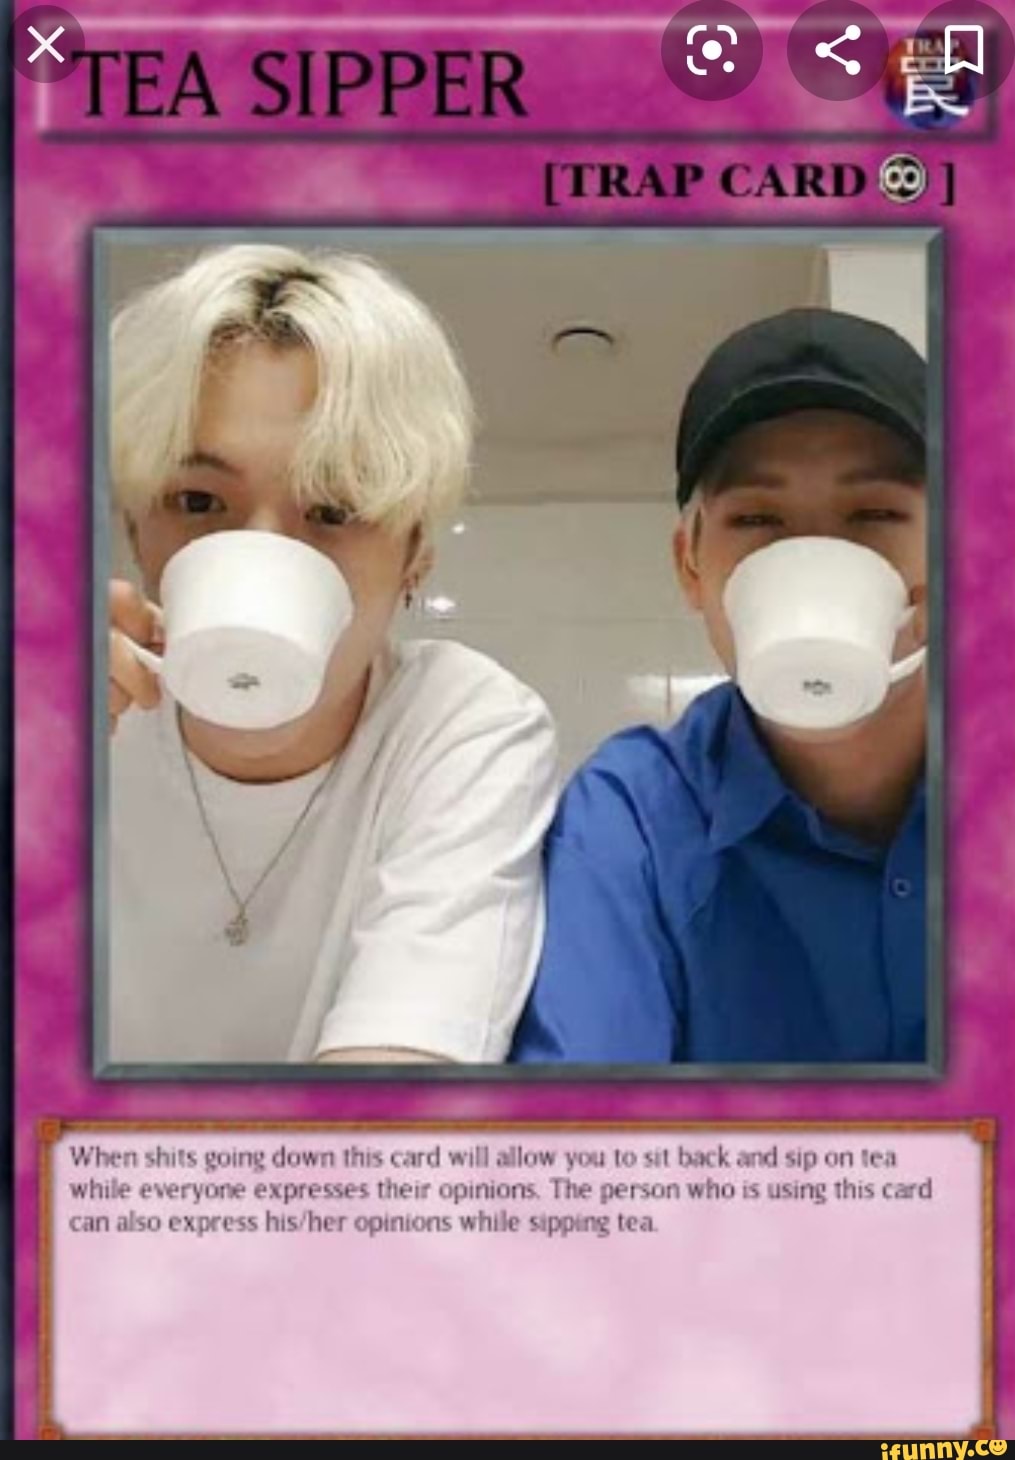 TEA SIPPER (TRAP CARDS] DIPS TEA When shits going down this card will allow  you to sit back and sip on tea while everyone's jimmies get rustled. -  iFunny Brazil